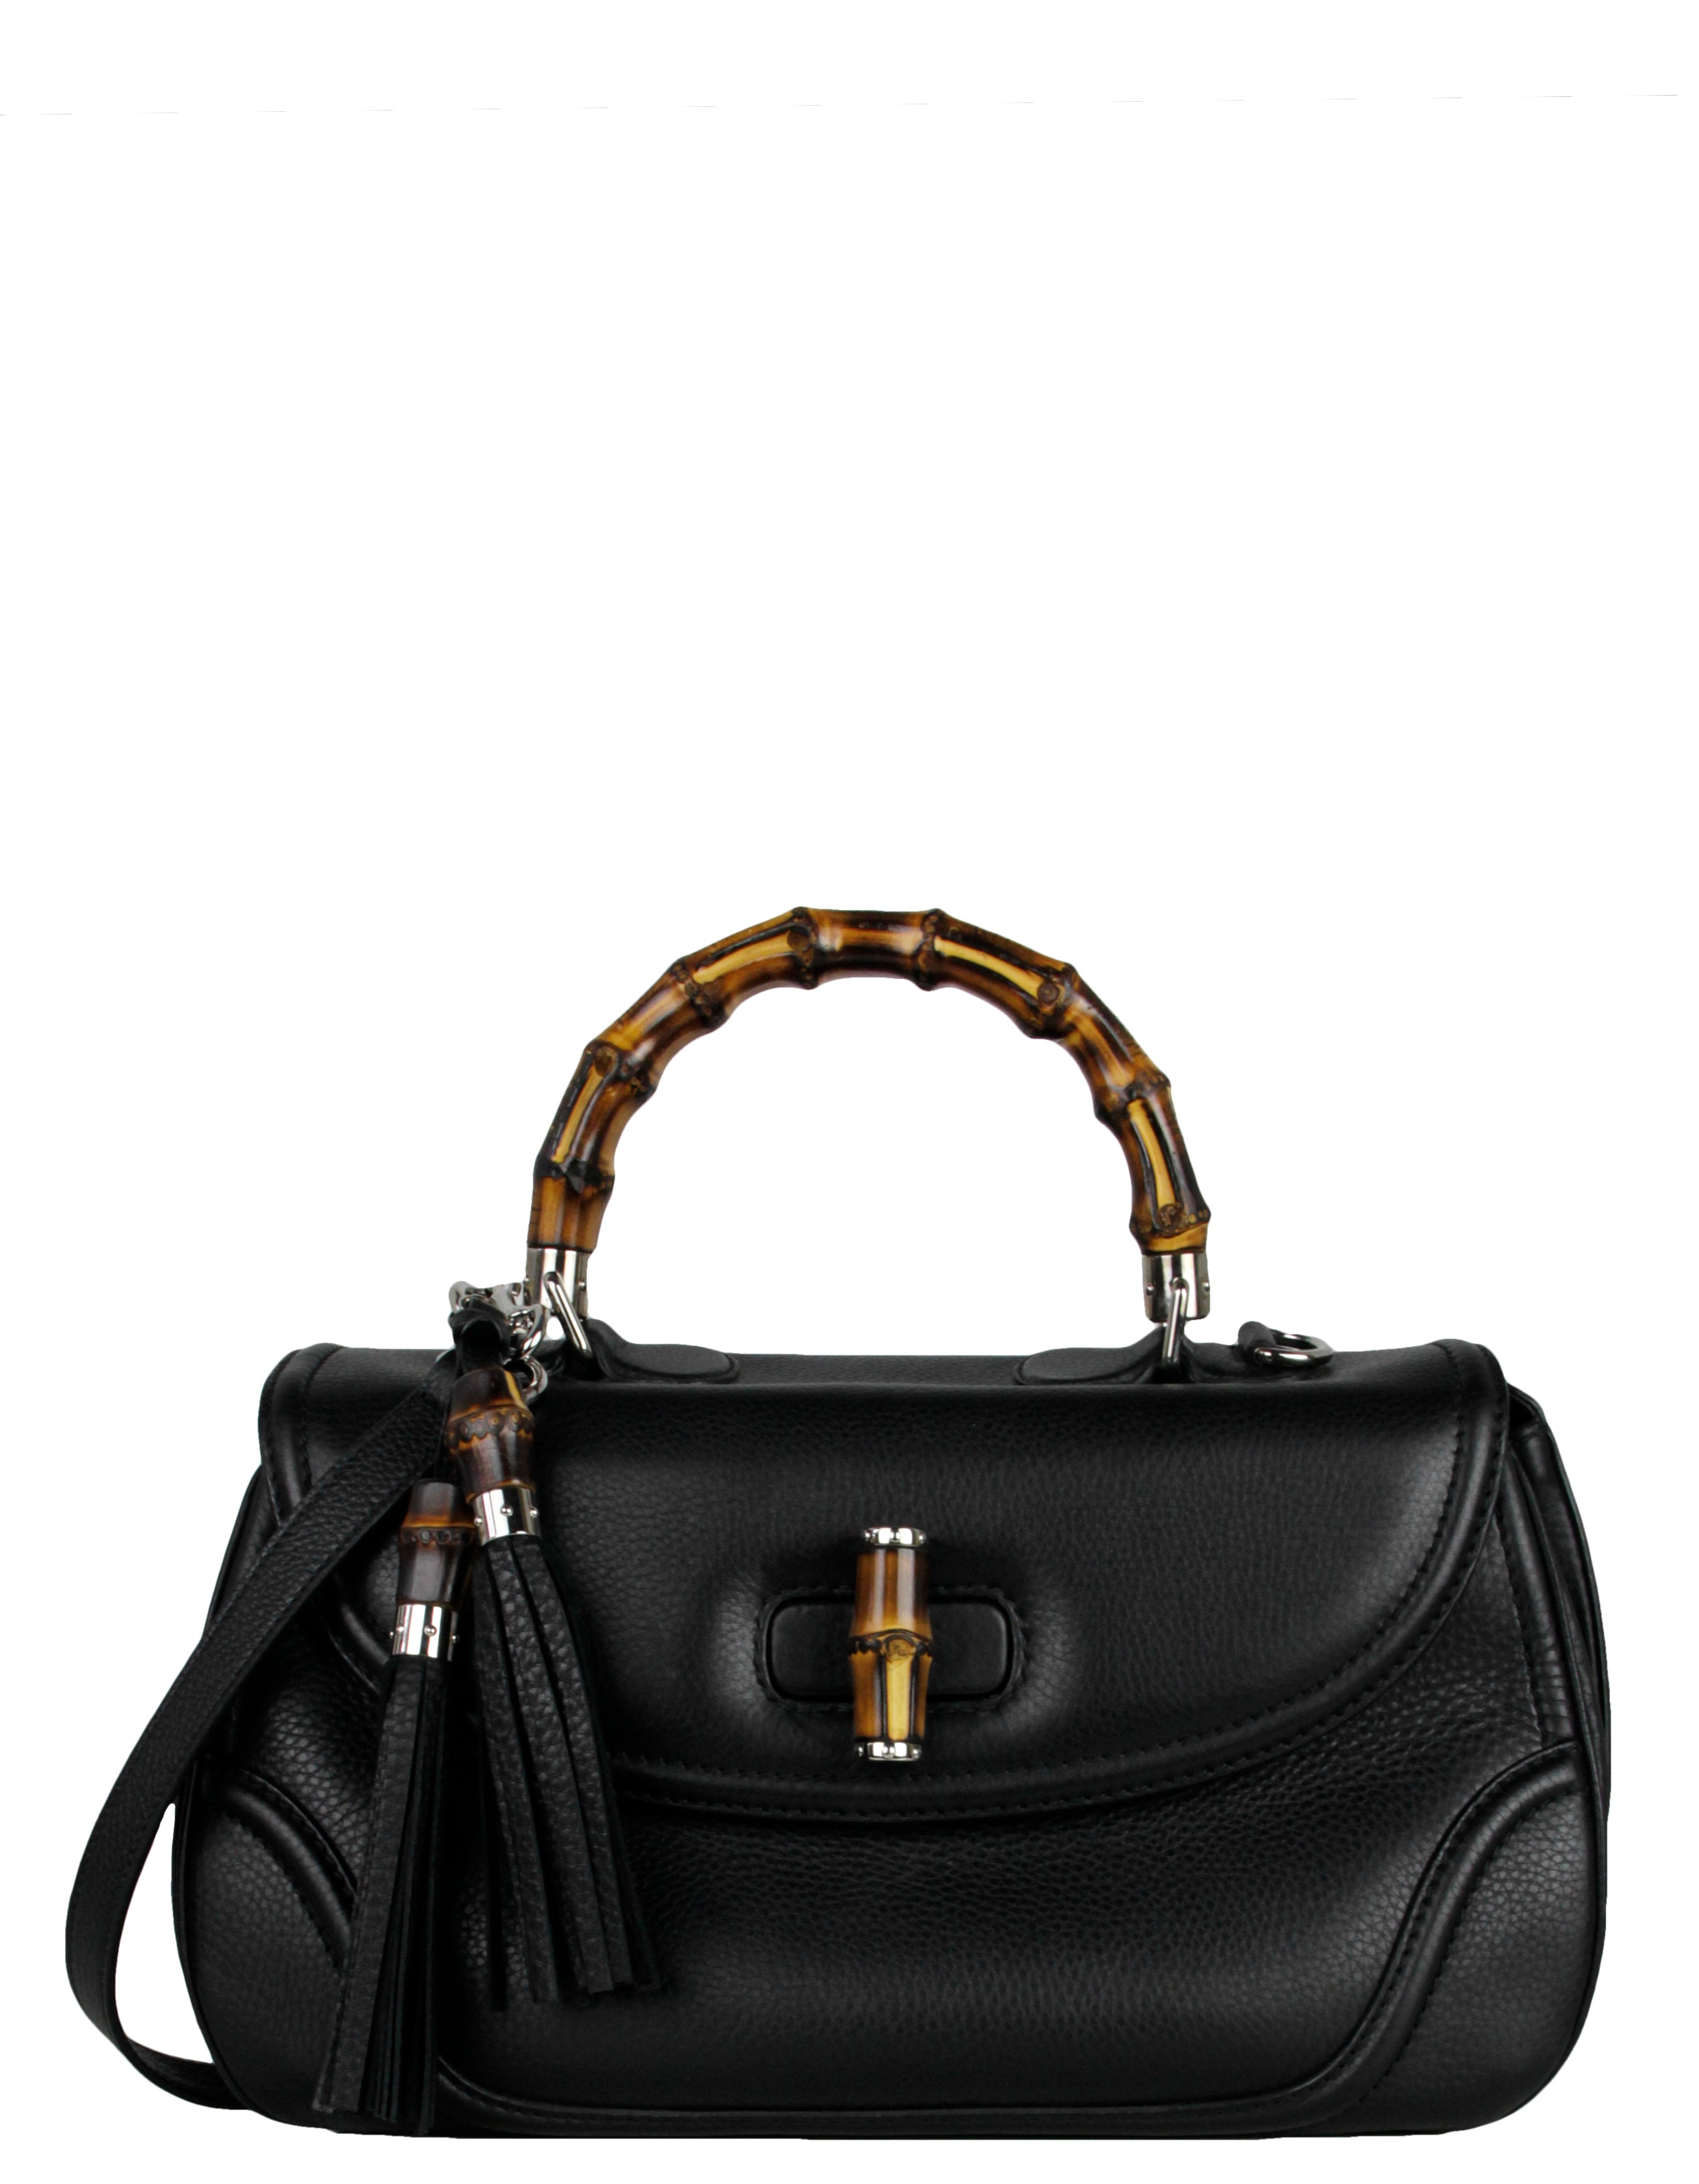 Gucci Black Leather New Bamboo Large Top Handle Bag